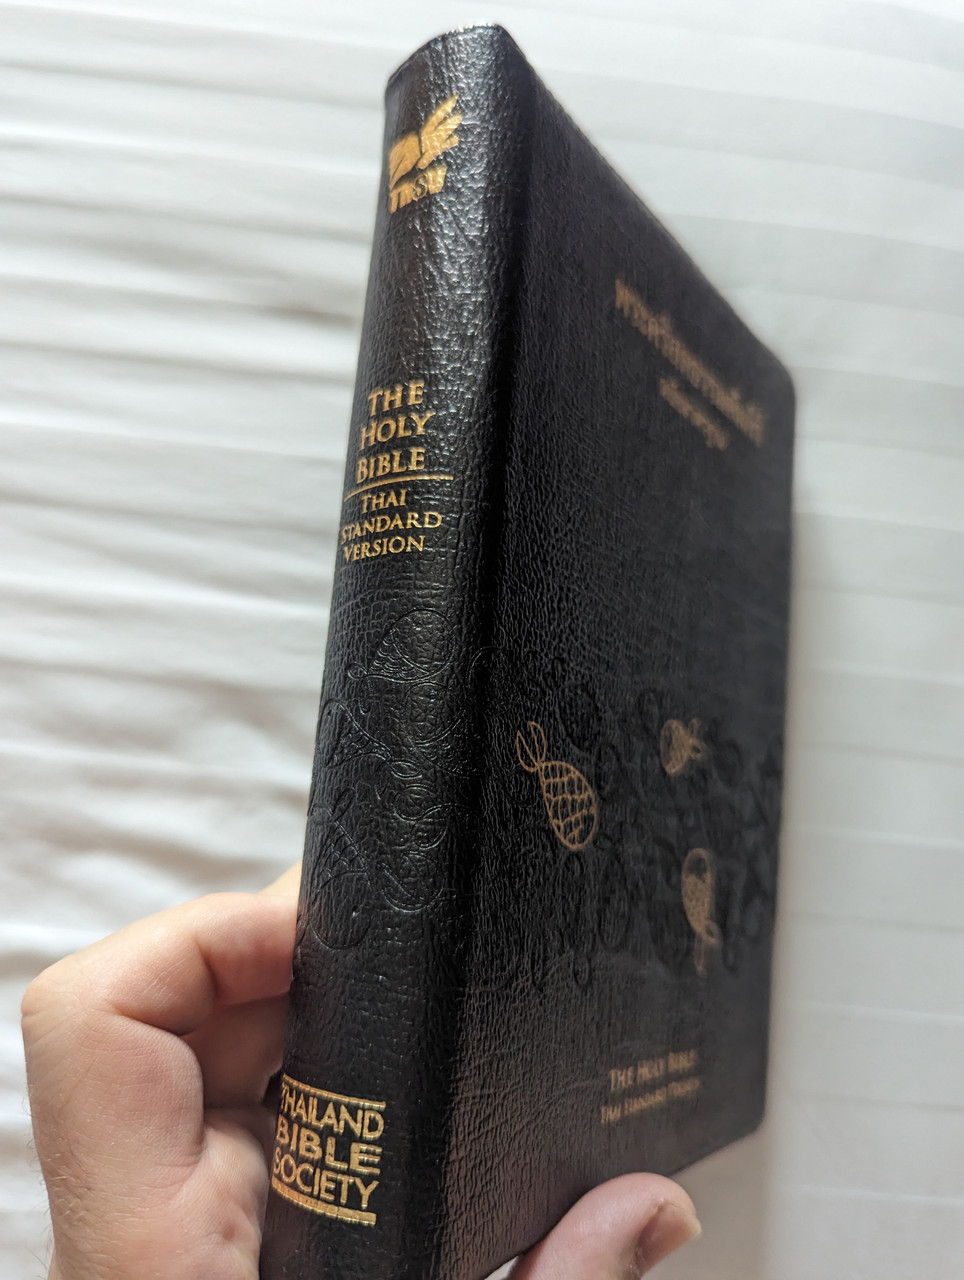 https://cdn10.bigcommerce.com/s-62bdpkt7pb/products/7535/images/311939/Thai_Standard_Version_THSV_Holy_Bible_Zippered_Black_Leather_with_Thumb_Index_2__34075.1699822553.1280.1280.jpg?c=2